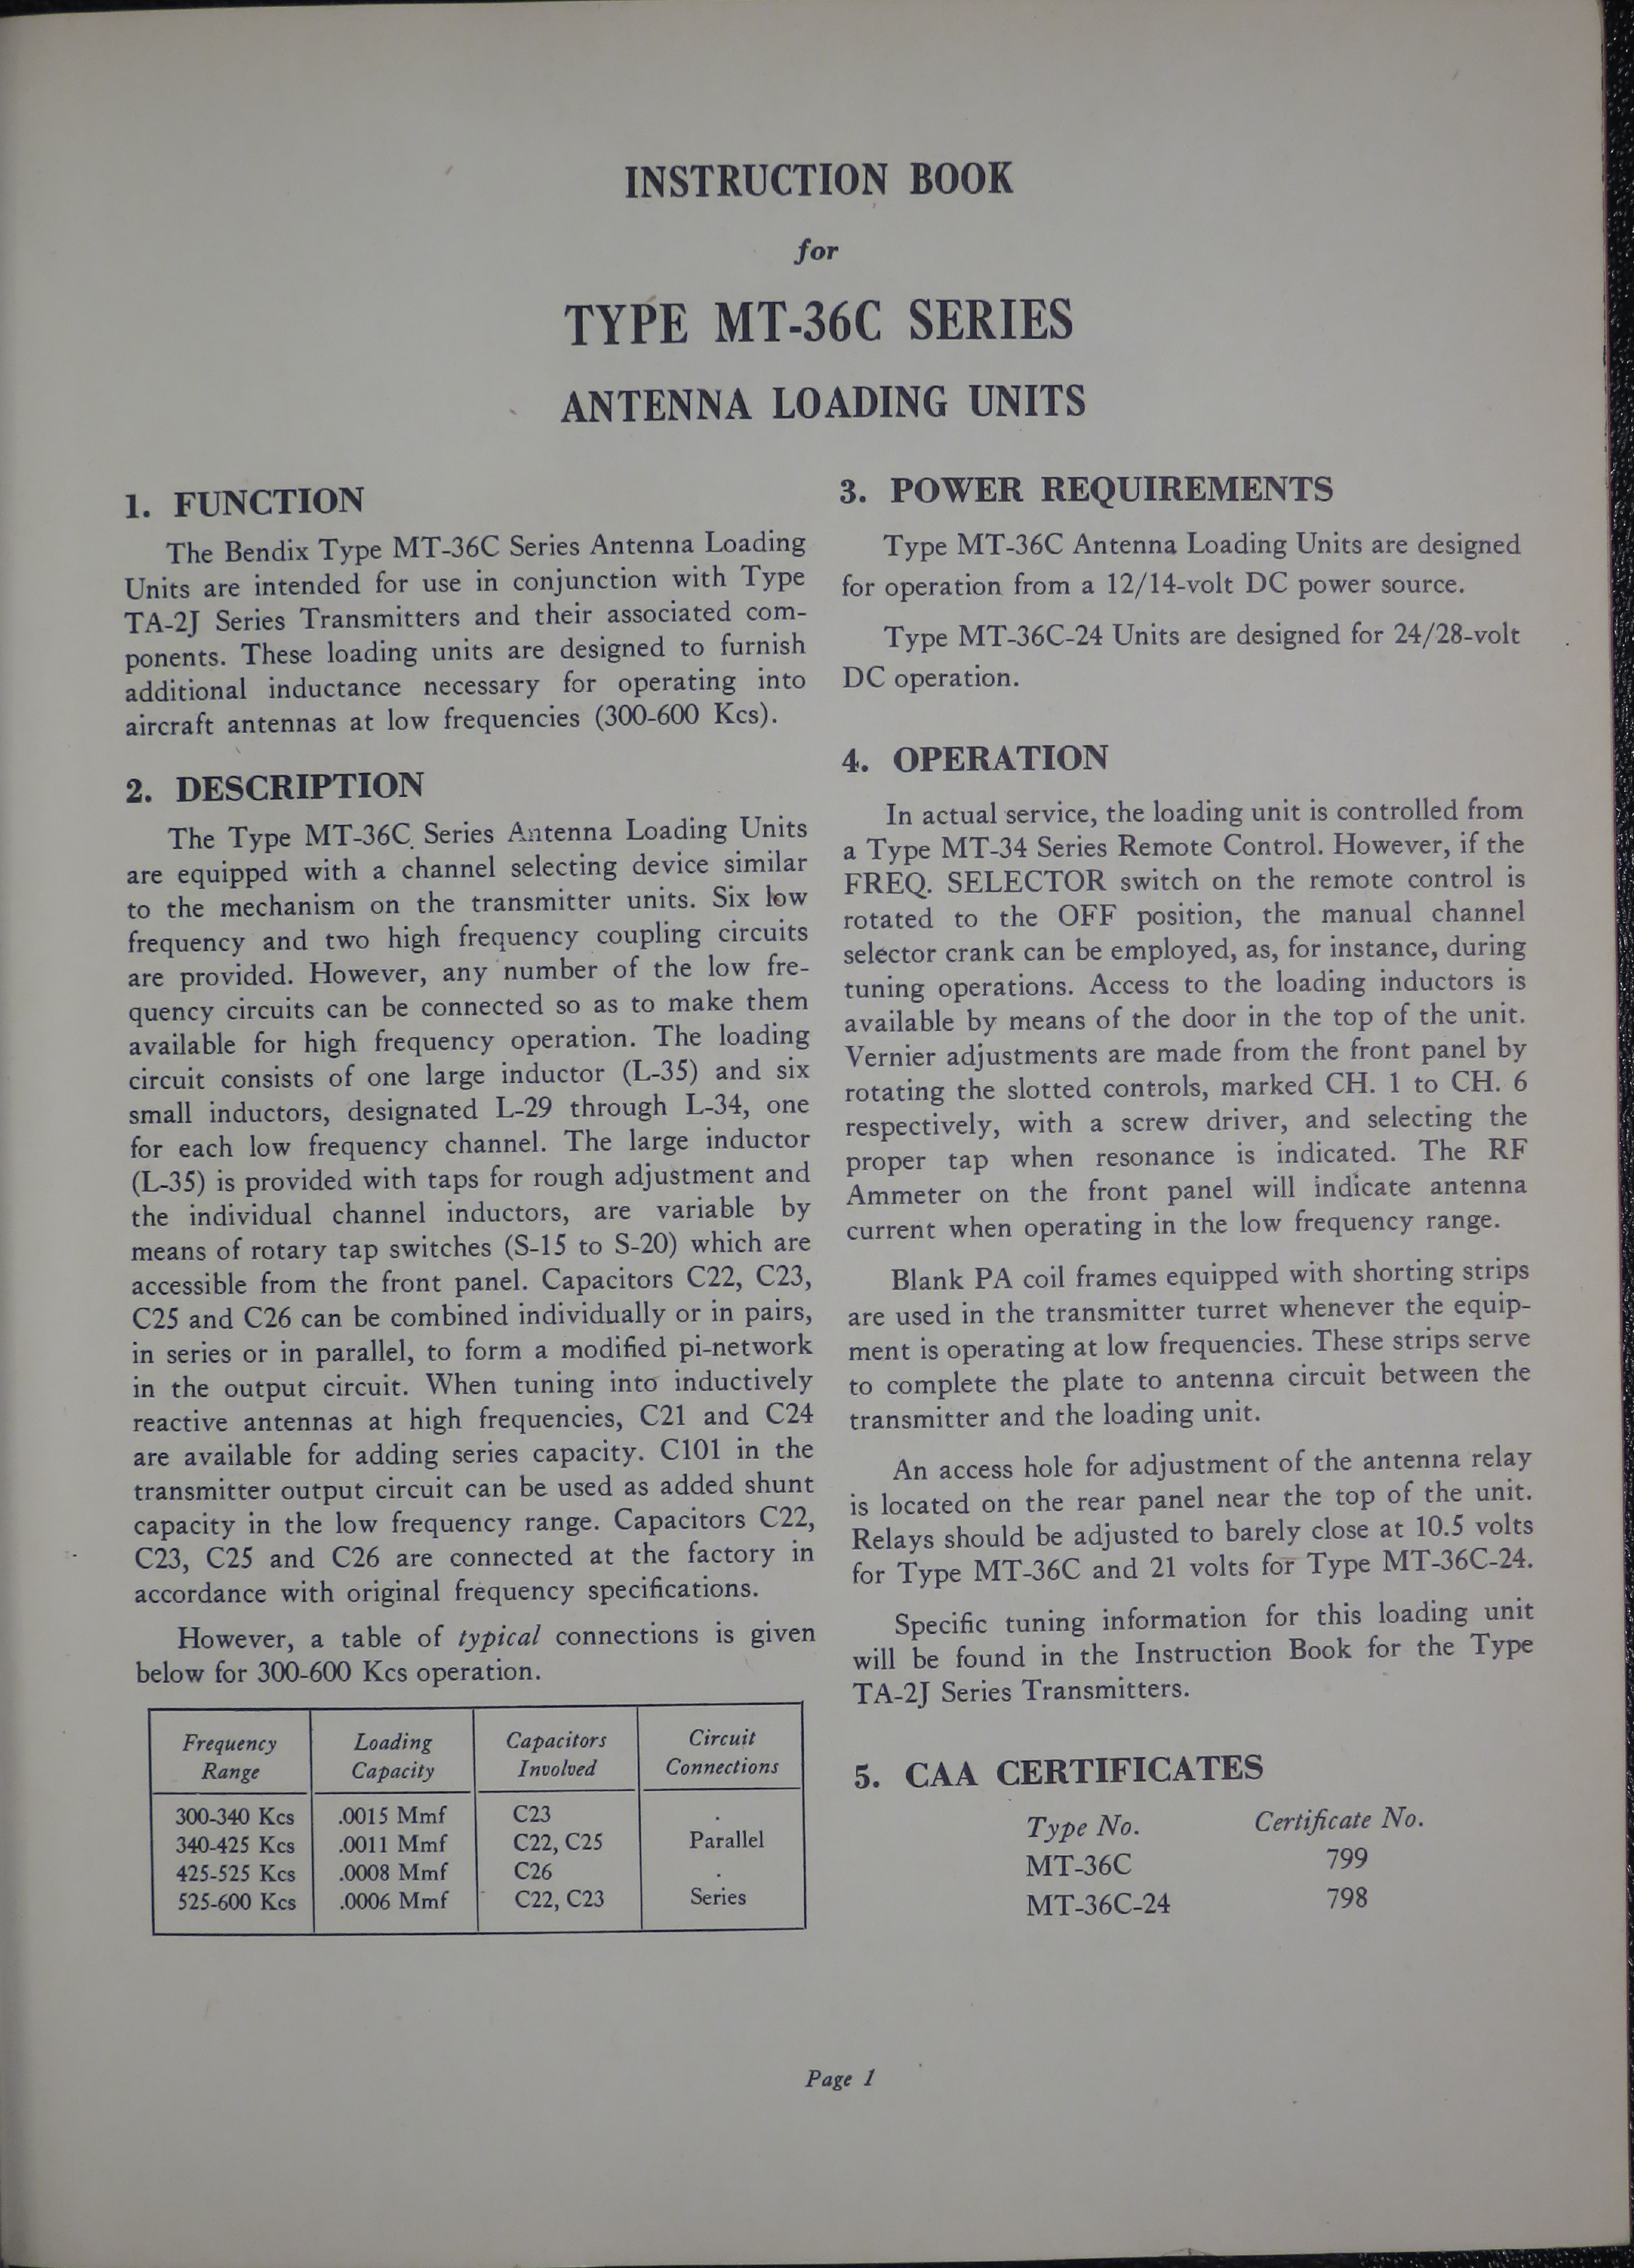 Sample page 7 from AirCorps Library document: Instruction Book for Types MT-36C and MT-36C-24 Antenna Loading Units